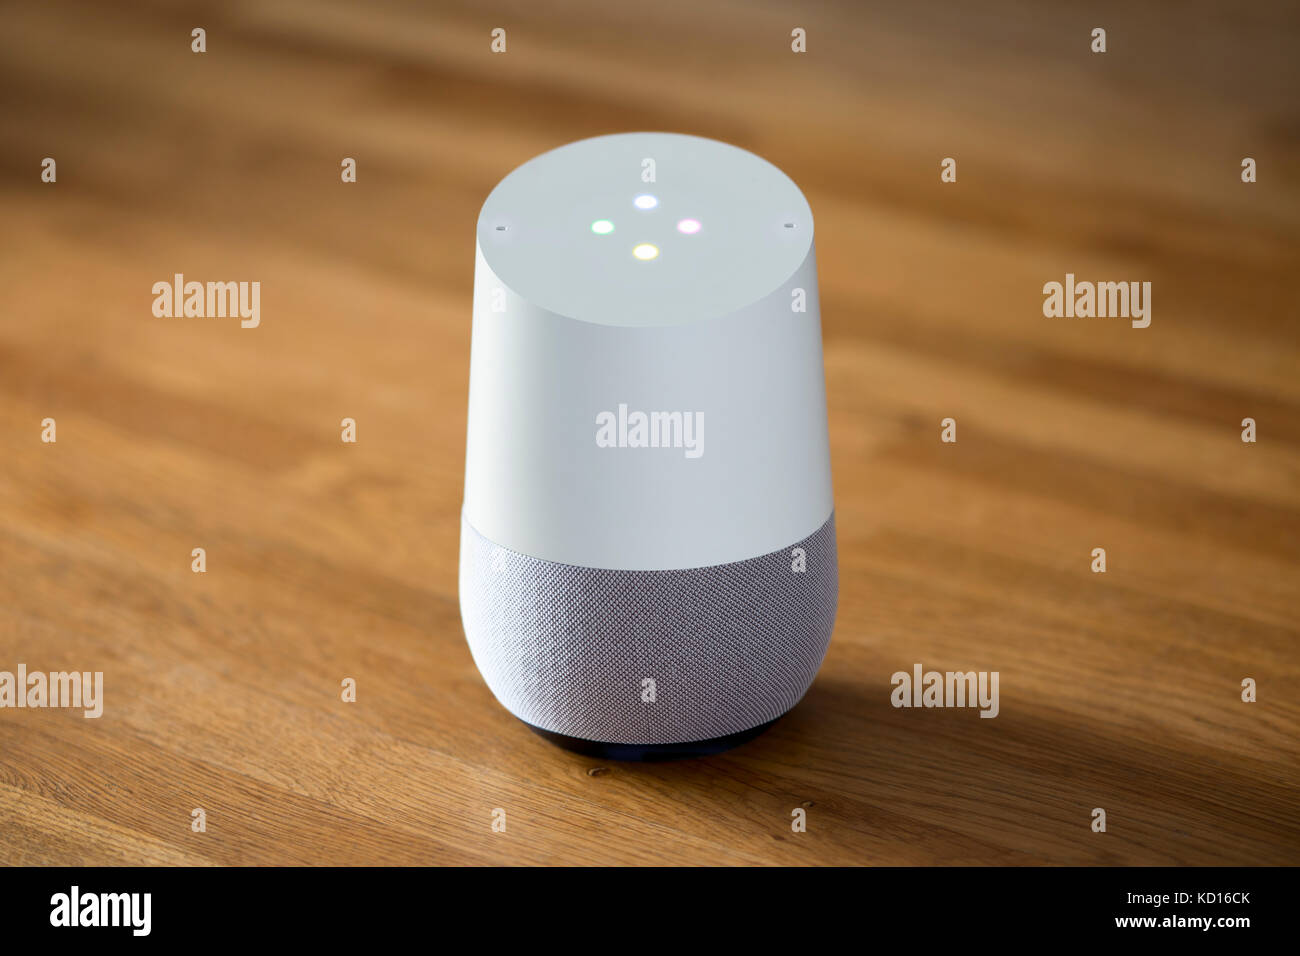 The 2016 release Google Home smart speaker and intelligent personal assistant device shot against a wooden background (Editorial use only). Stock Photo